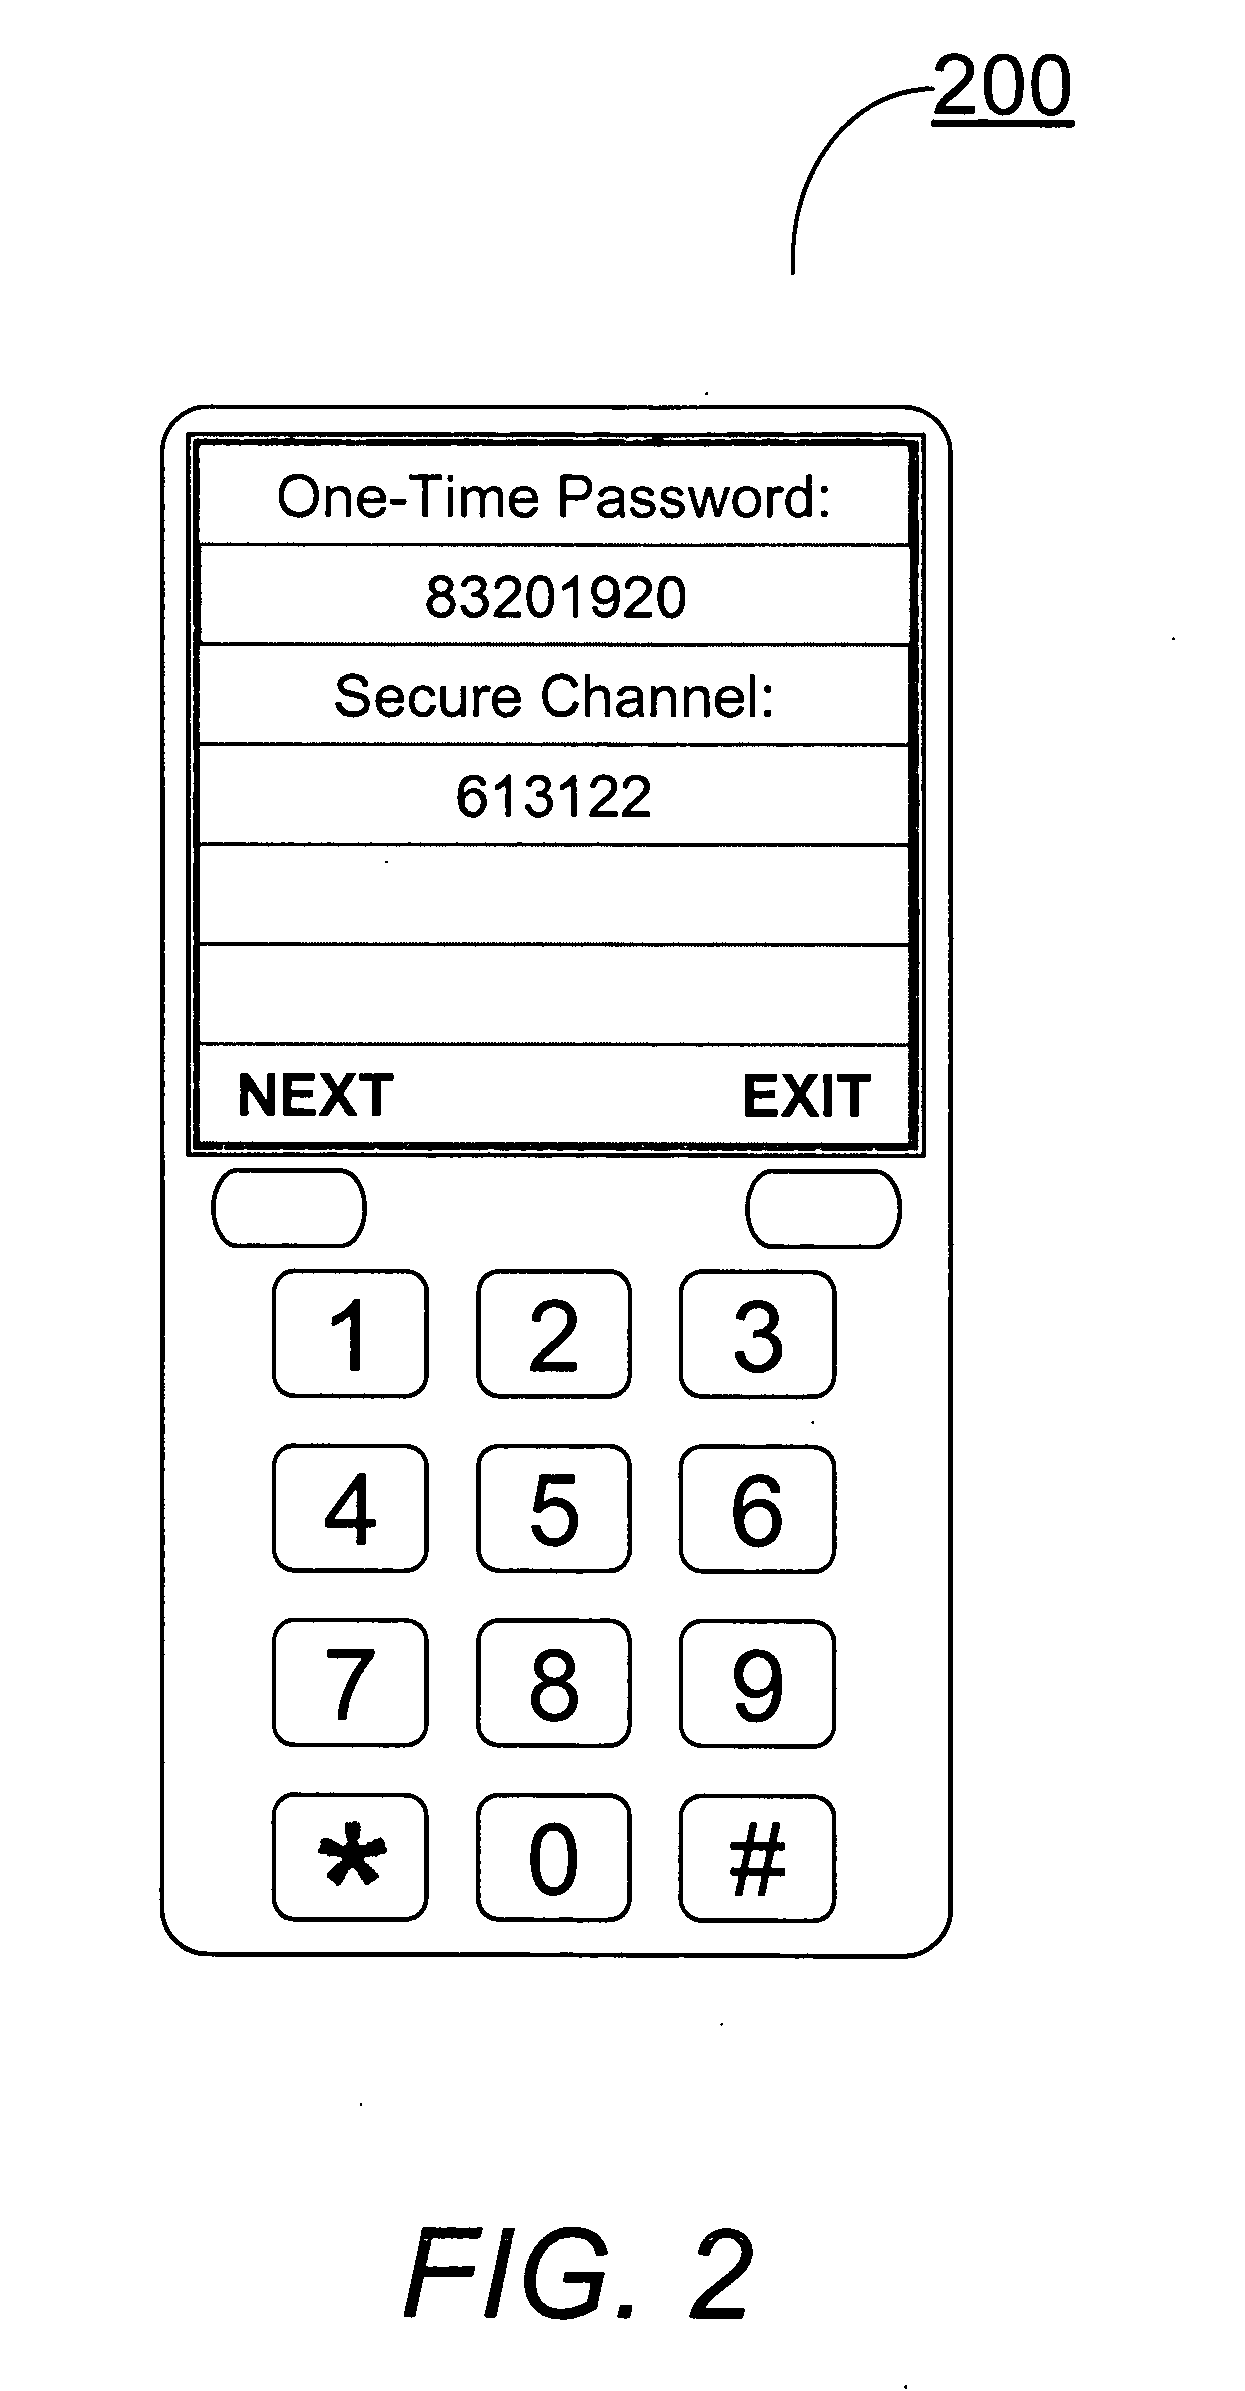 Mutual authentication and secure channel establishment between two parties using consecutive one-time passwords